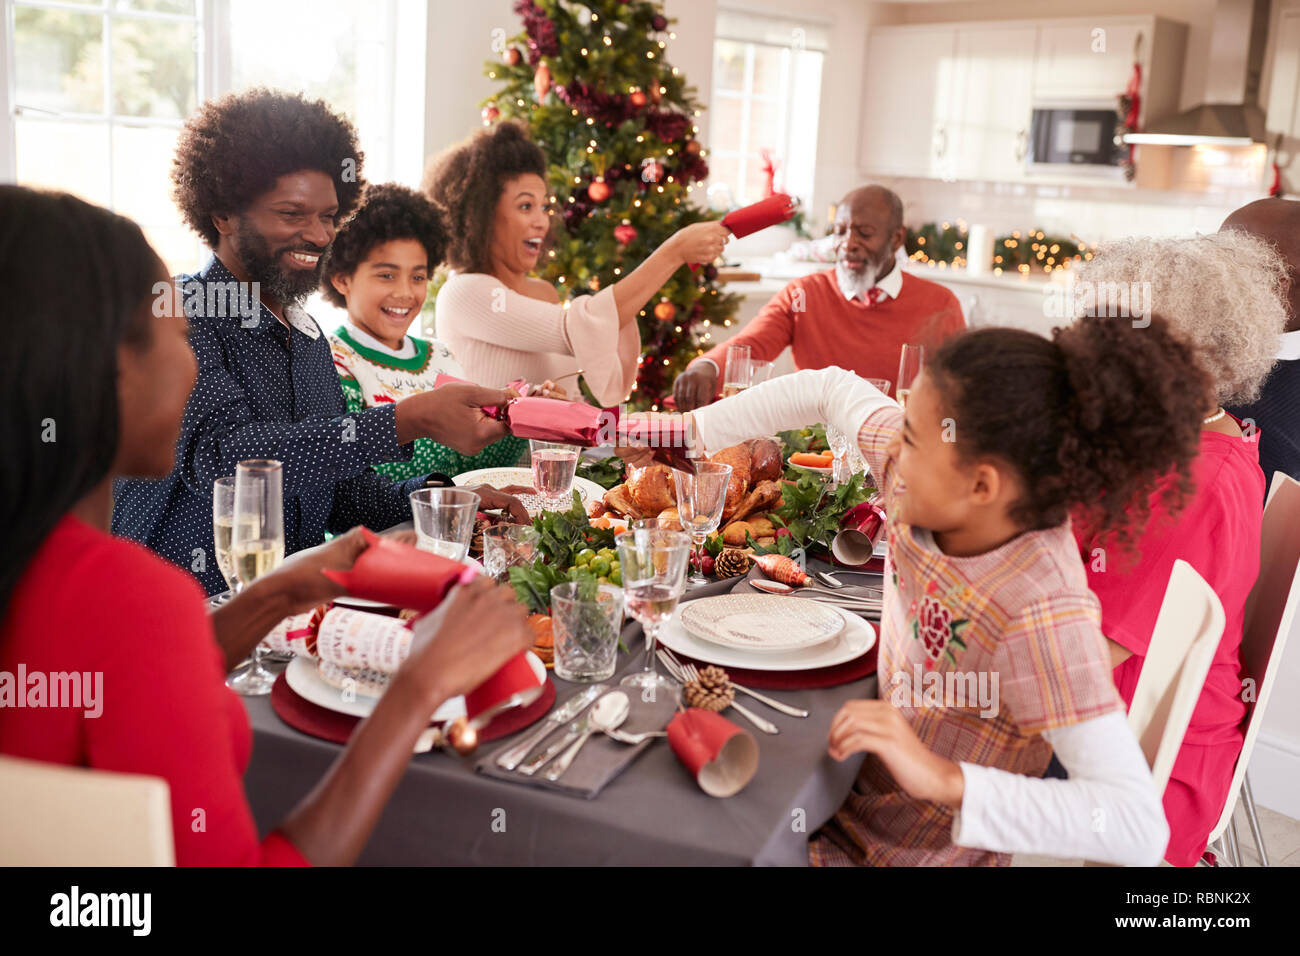 Mixed race, multi generation family having fun pulling crackers at the Christmas dinner table Stock Photo